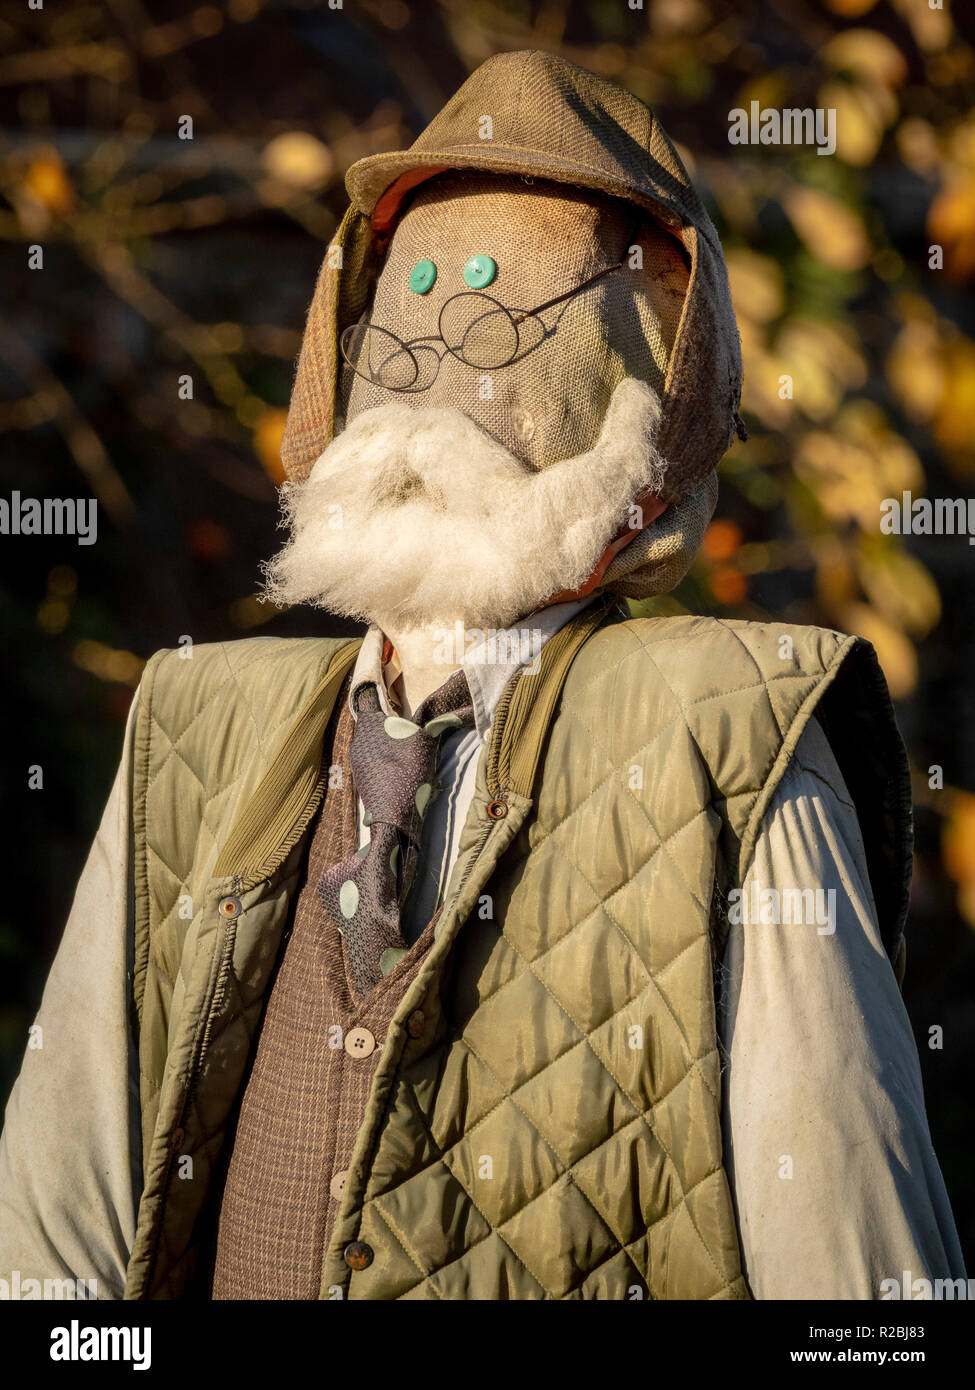 Scarecrow based on old man with beard, round glasses and hat like Mr McGreggor Stock Photo